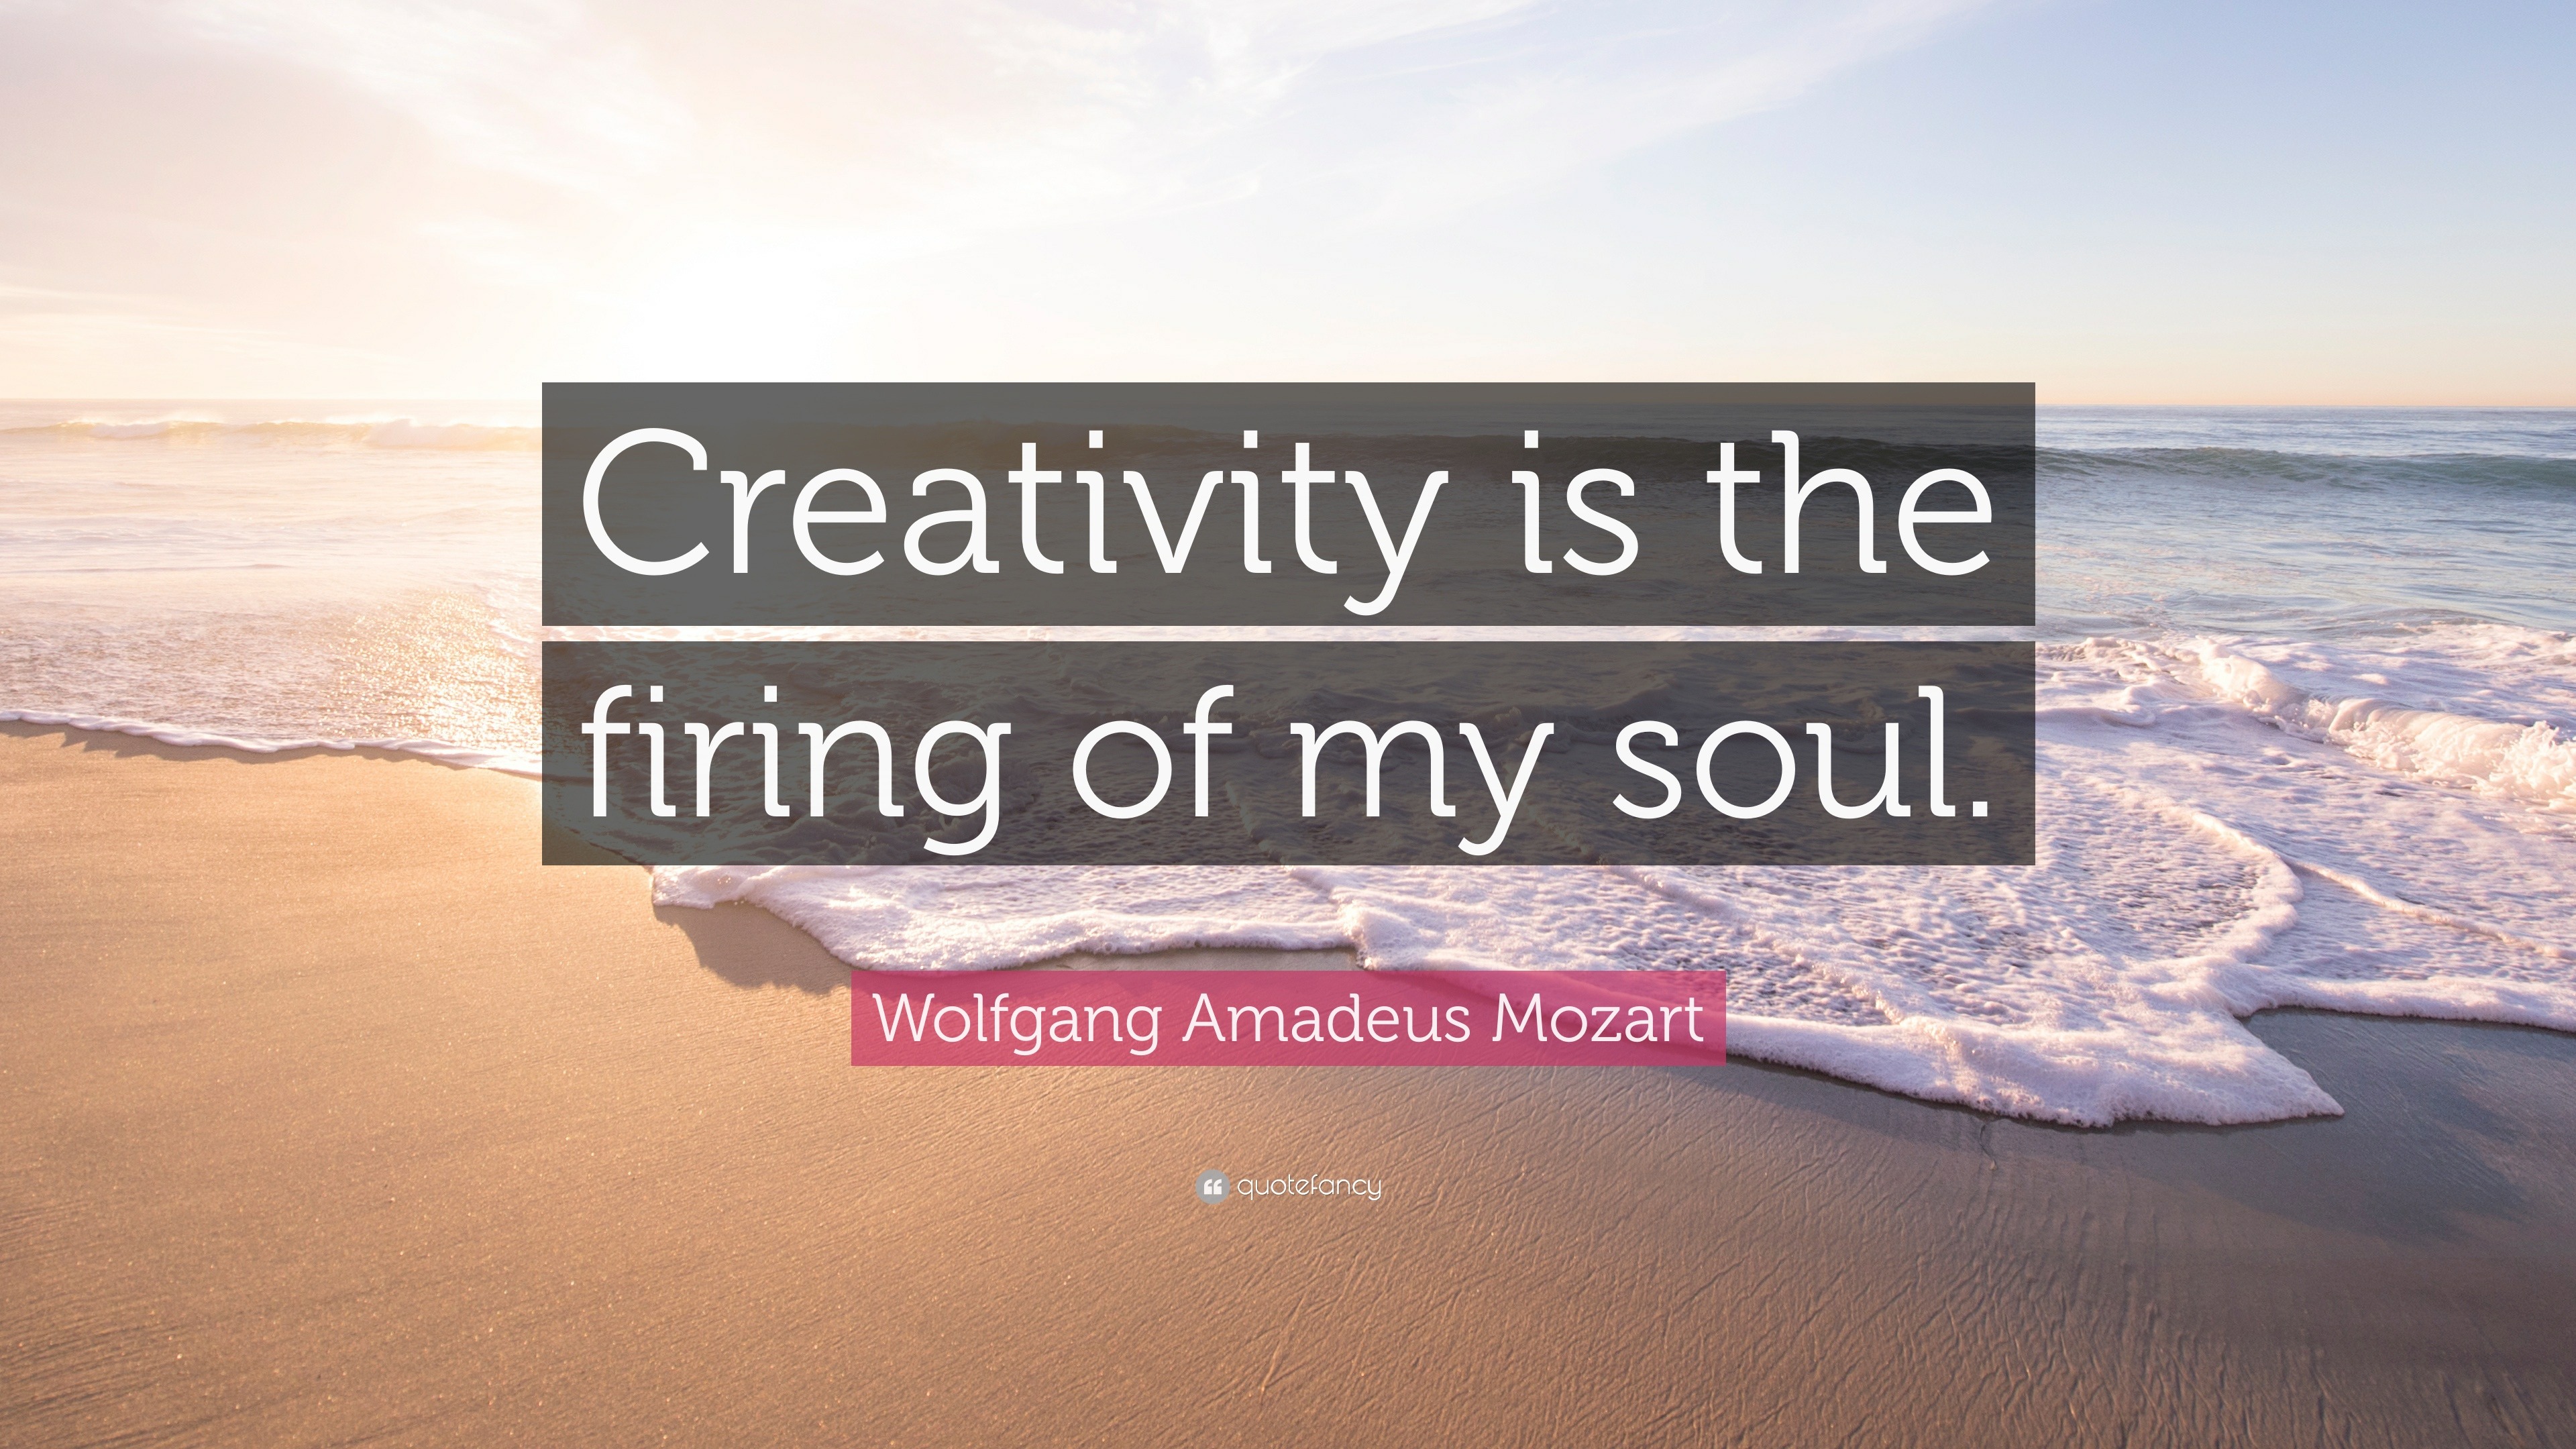 Wolfgang Amadeus Mozart Quote: “Creativity is the firing of my soul.”